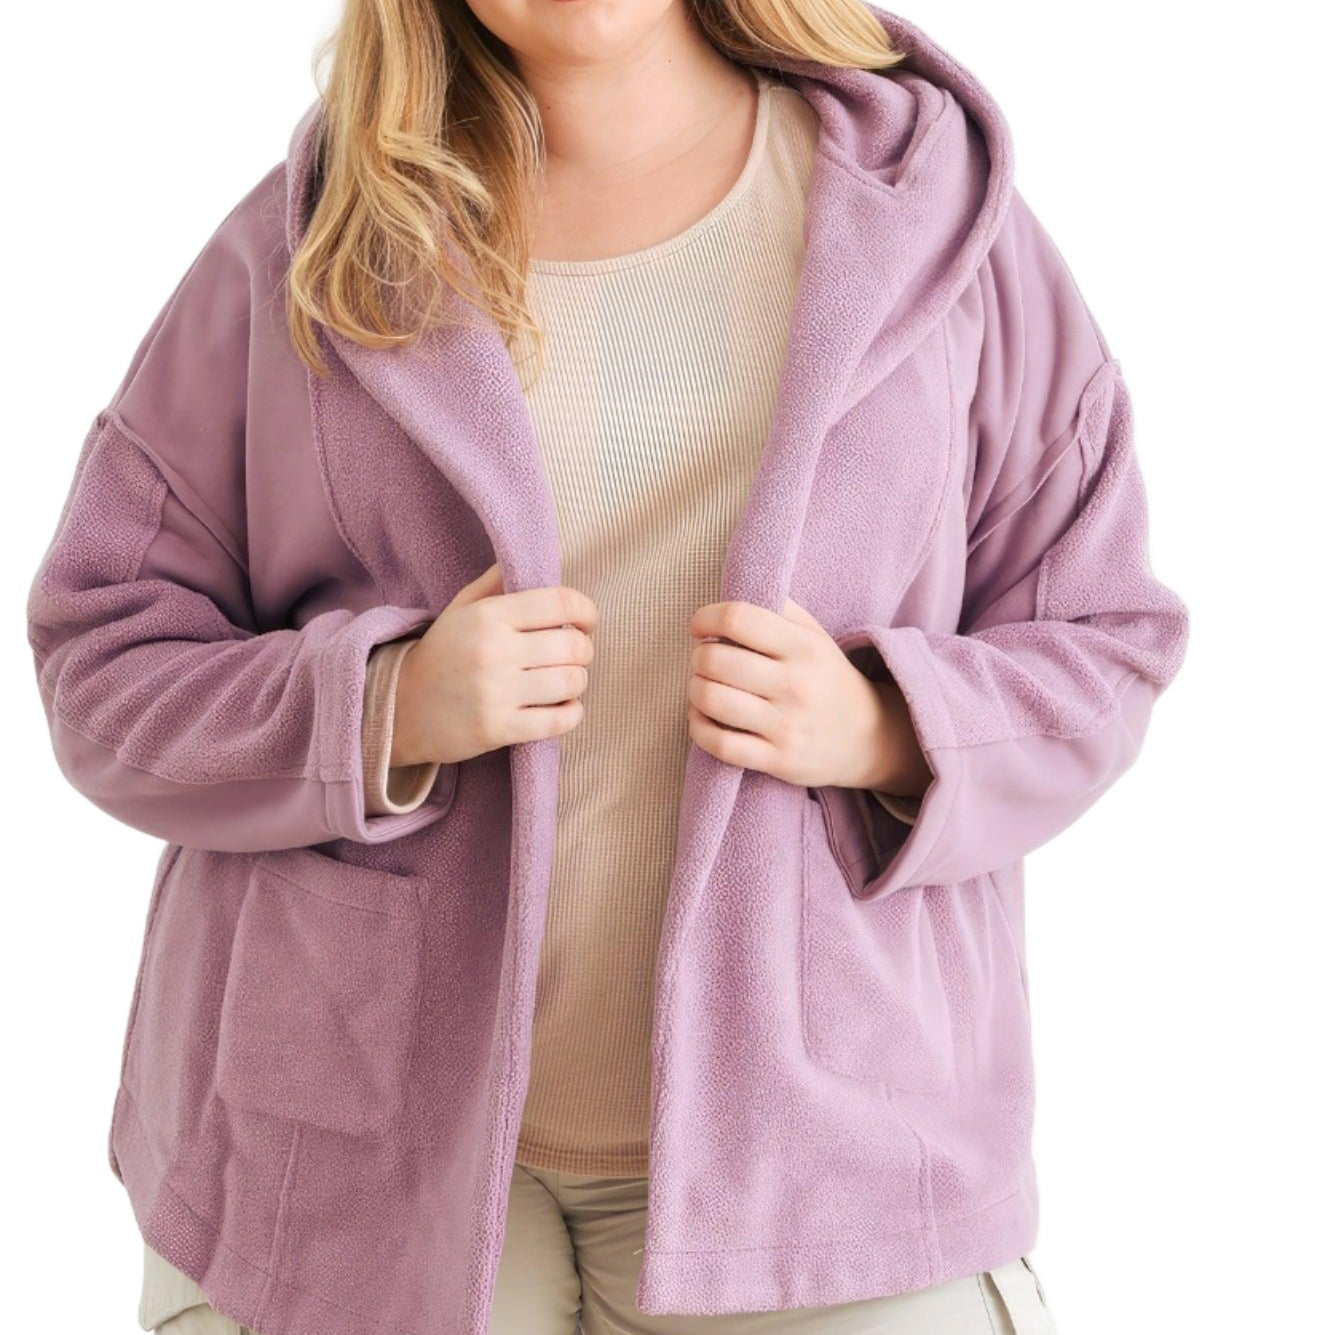 Women's Sweaters - Cardigans Plus Two Pocket Open Front Soft To Touch Hooded Cardigan Jacket